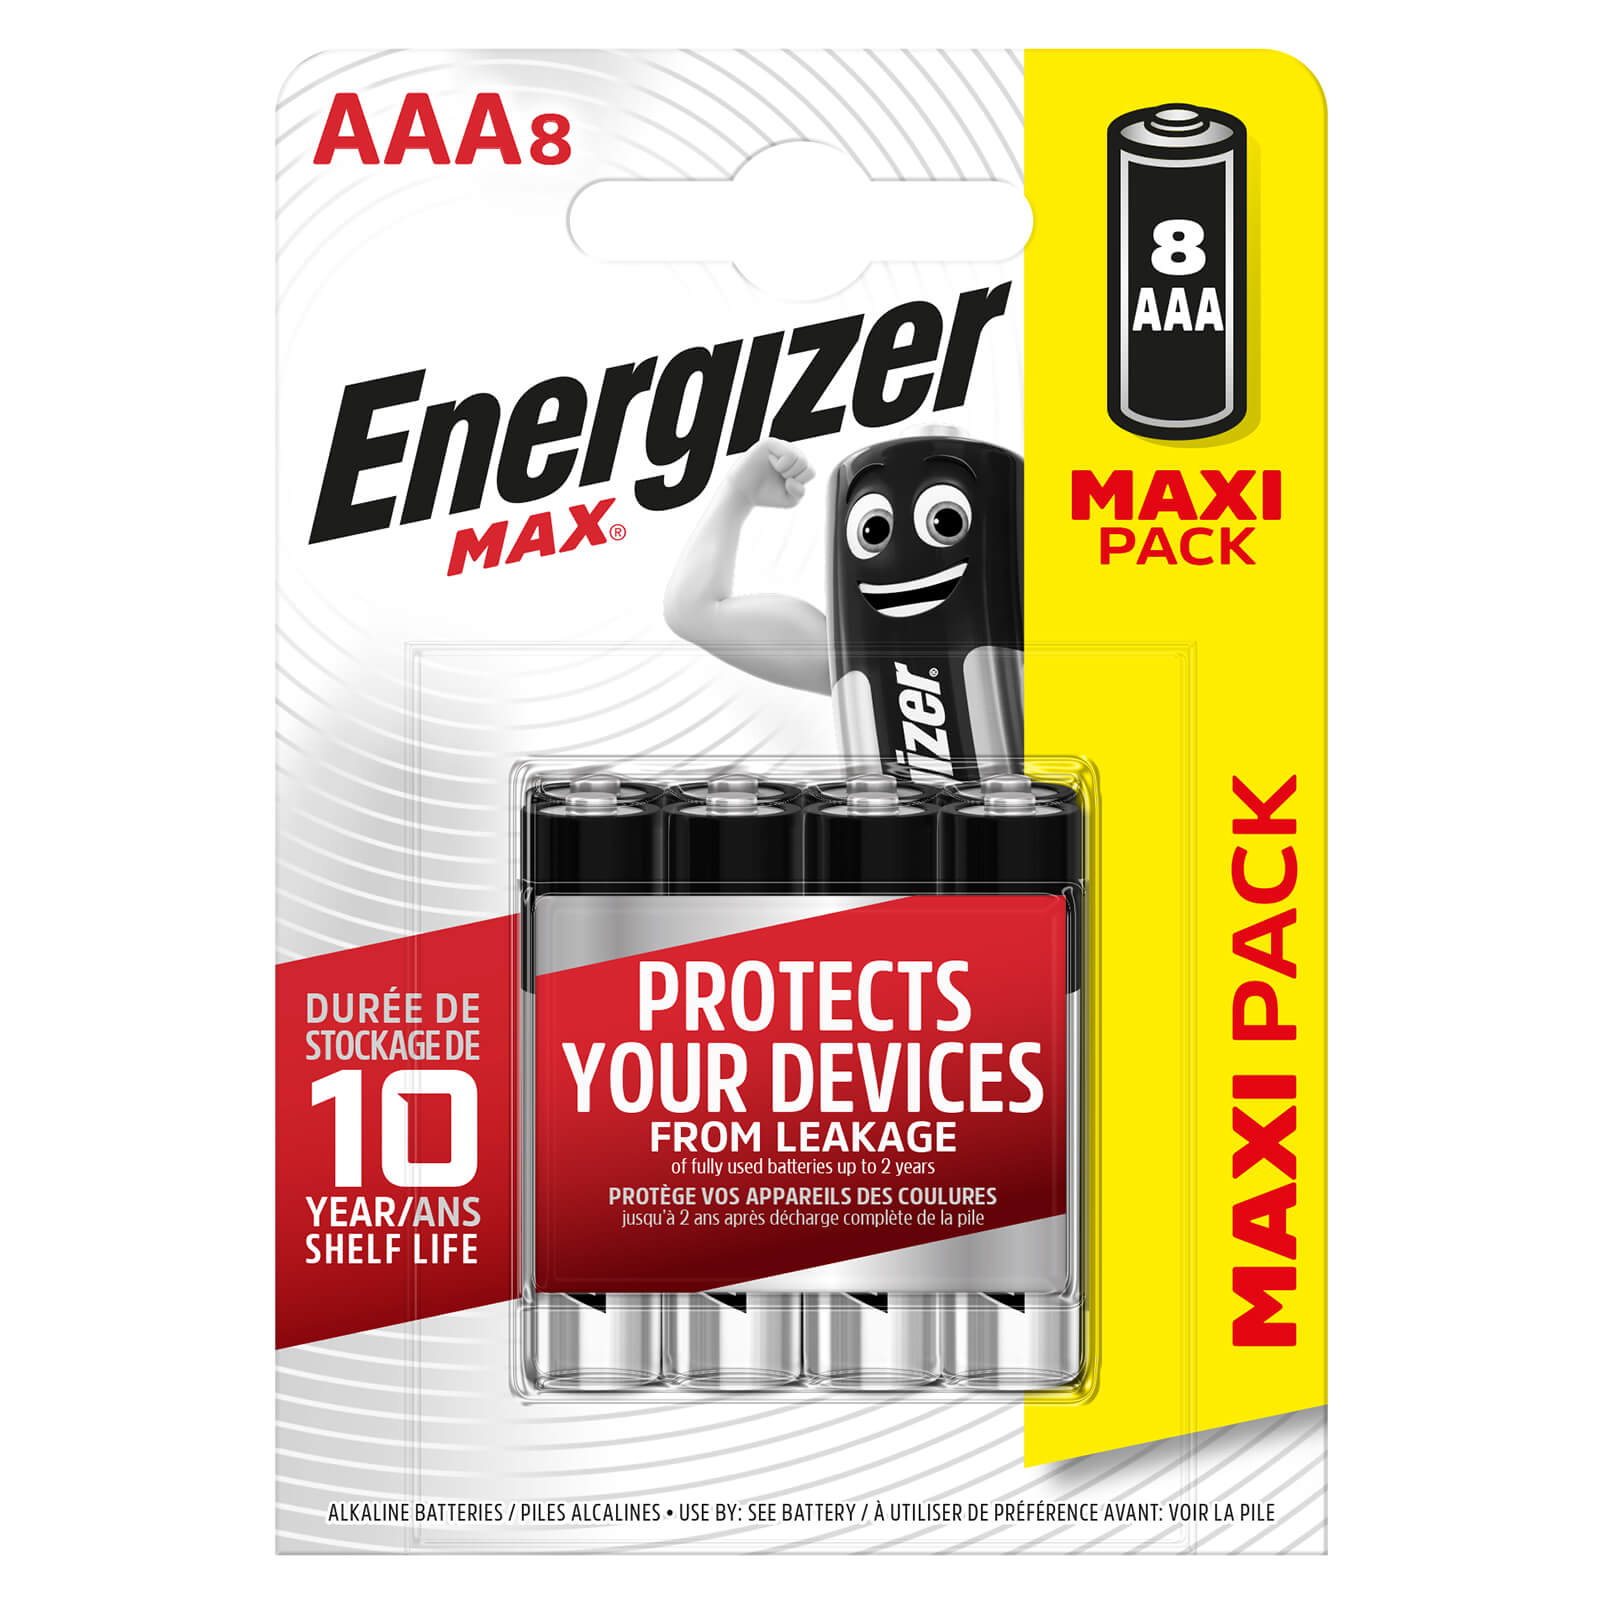 Photo of Energizer Max Alkaline Aaa Batteries - 8 Pack